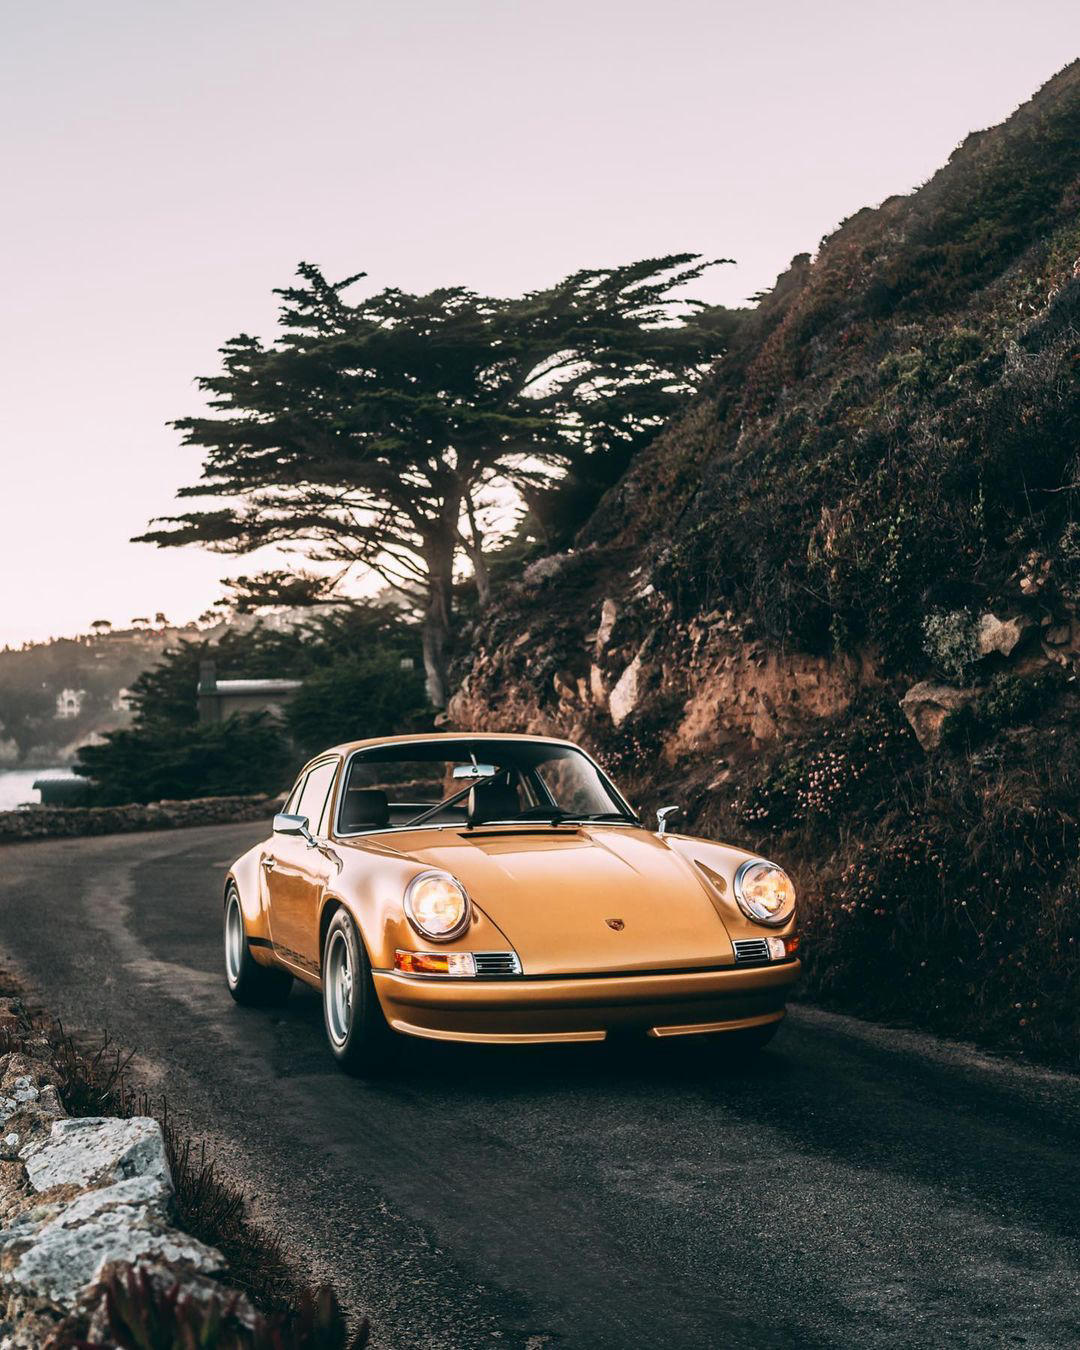 image  1 Porsche - This is what we mean when we say, “It’s golden hour